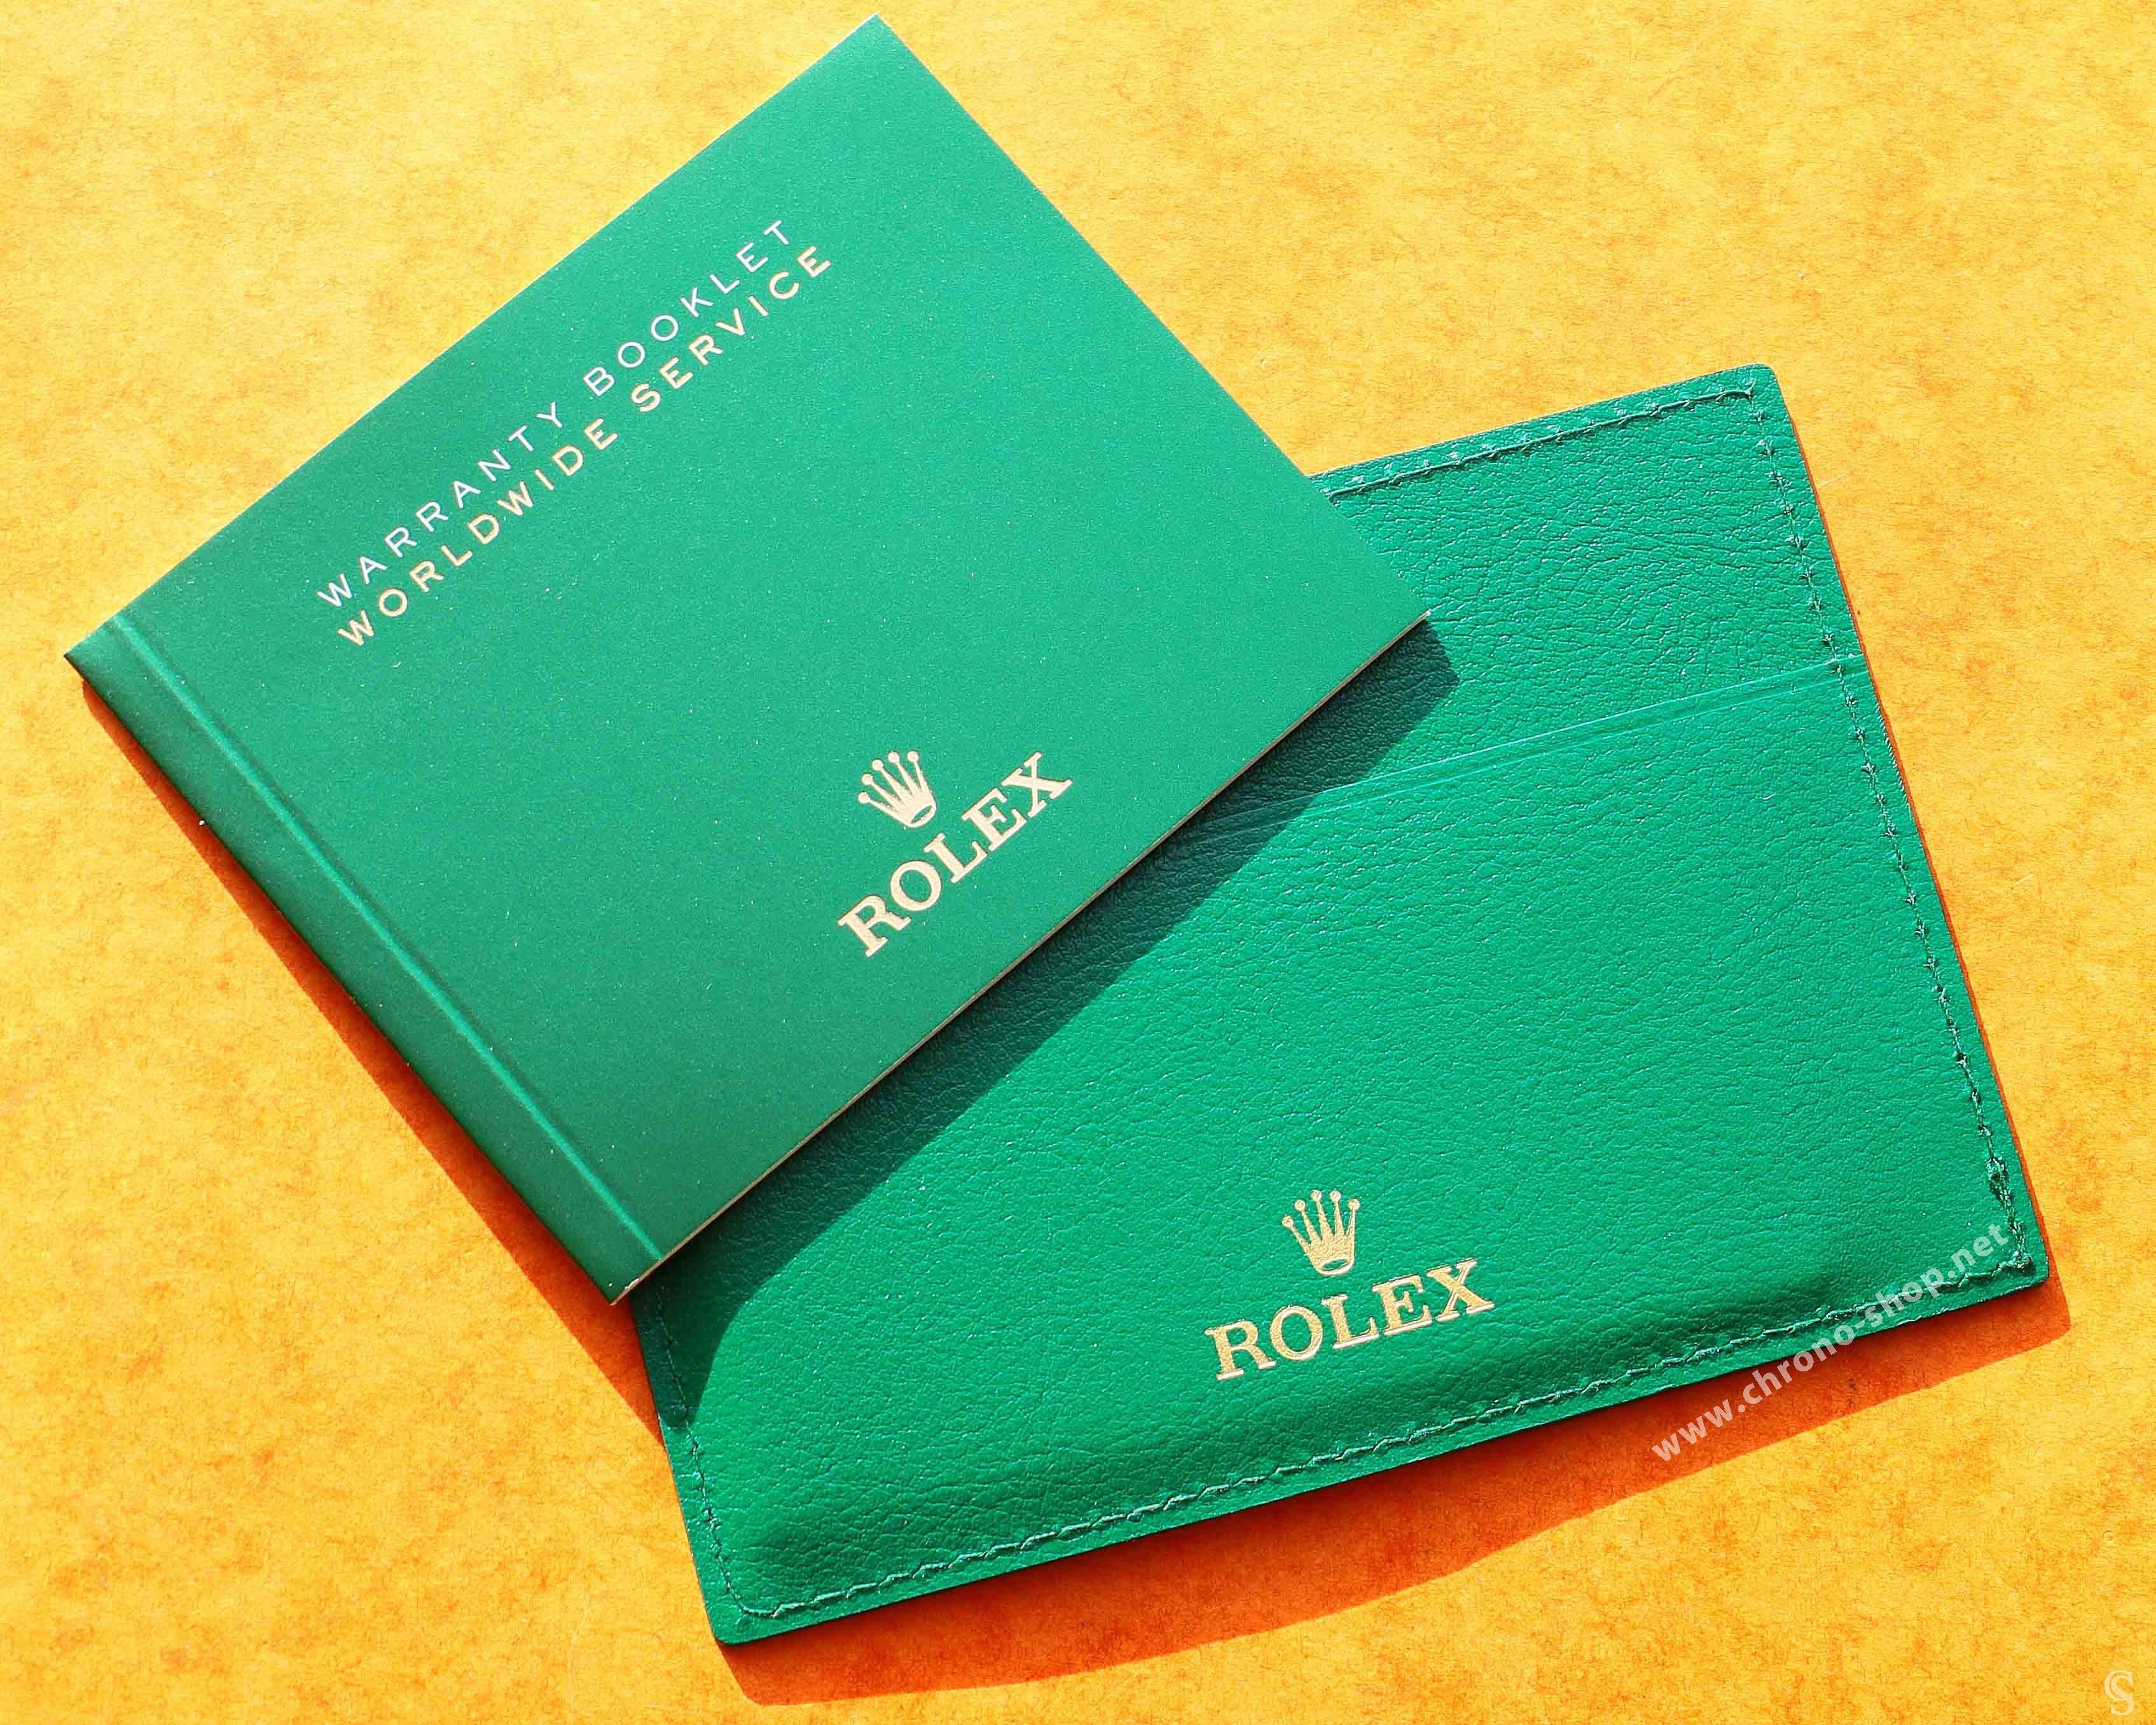 version Card Holder & Rolex Worldwide Guarantee and Service Manual